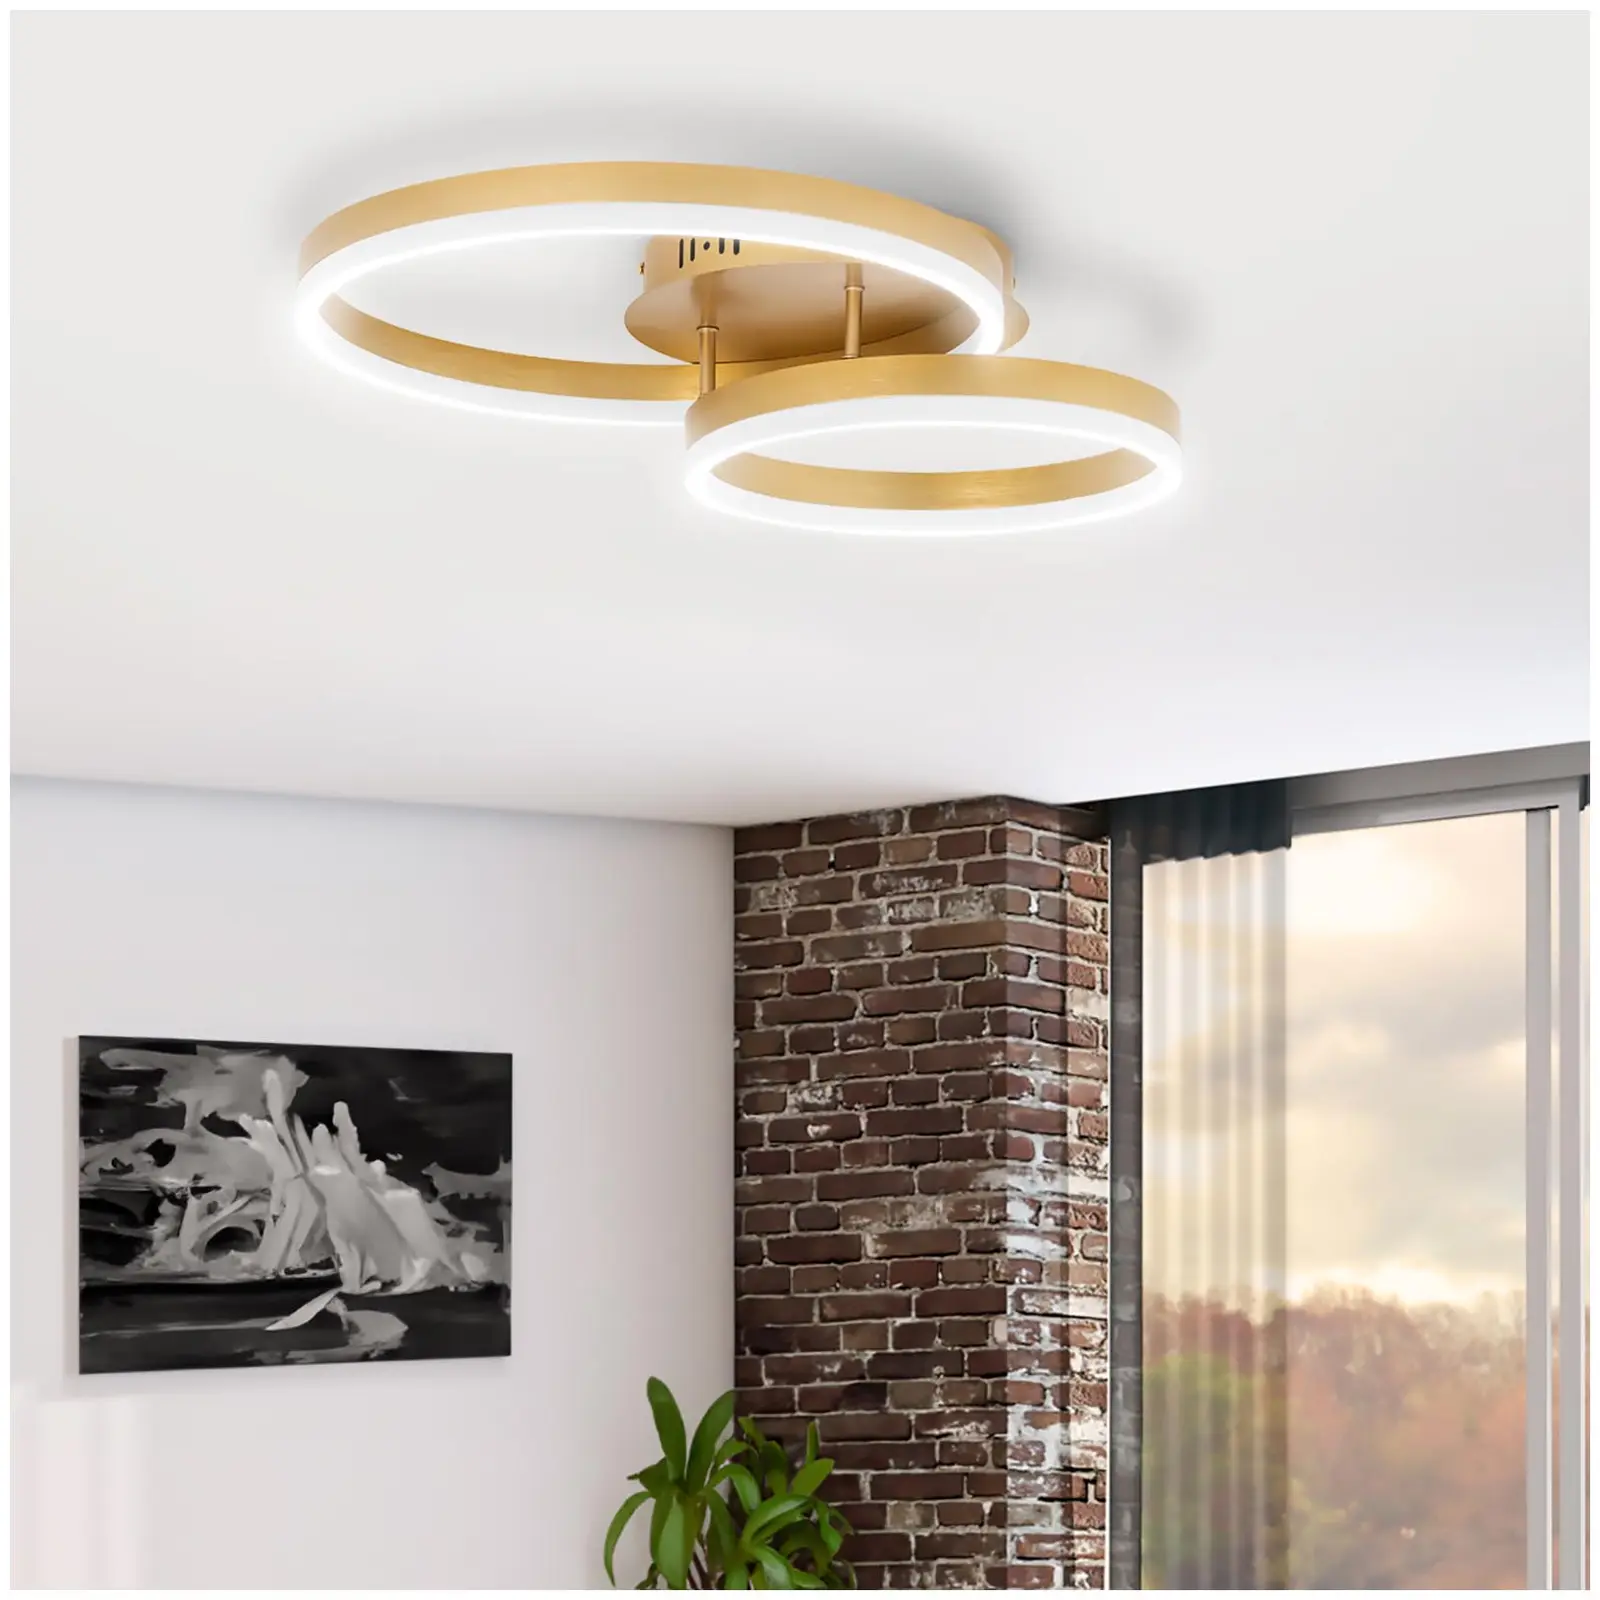 Ceiling Light - 2 circles - remote control - dimmable